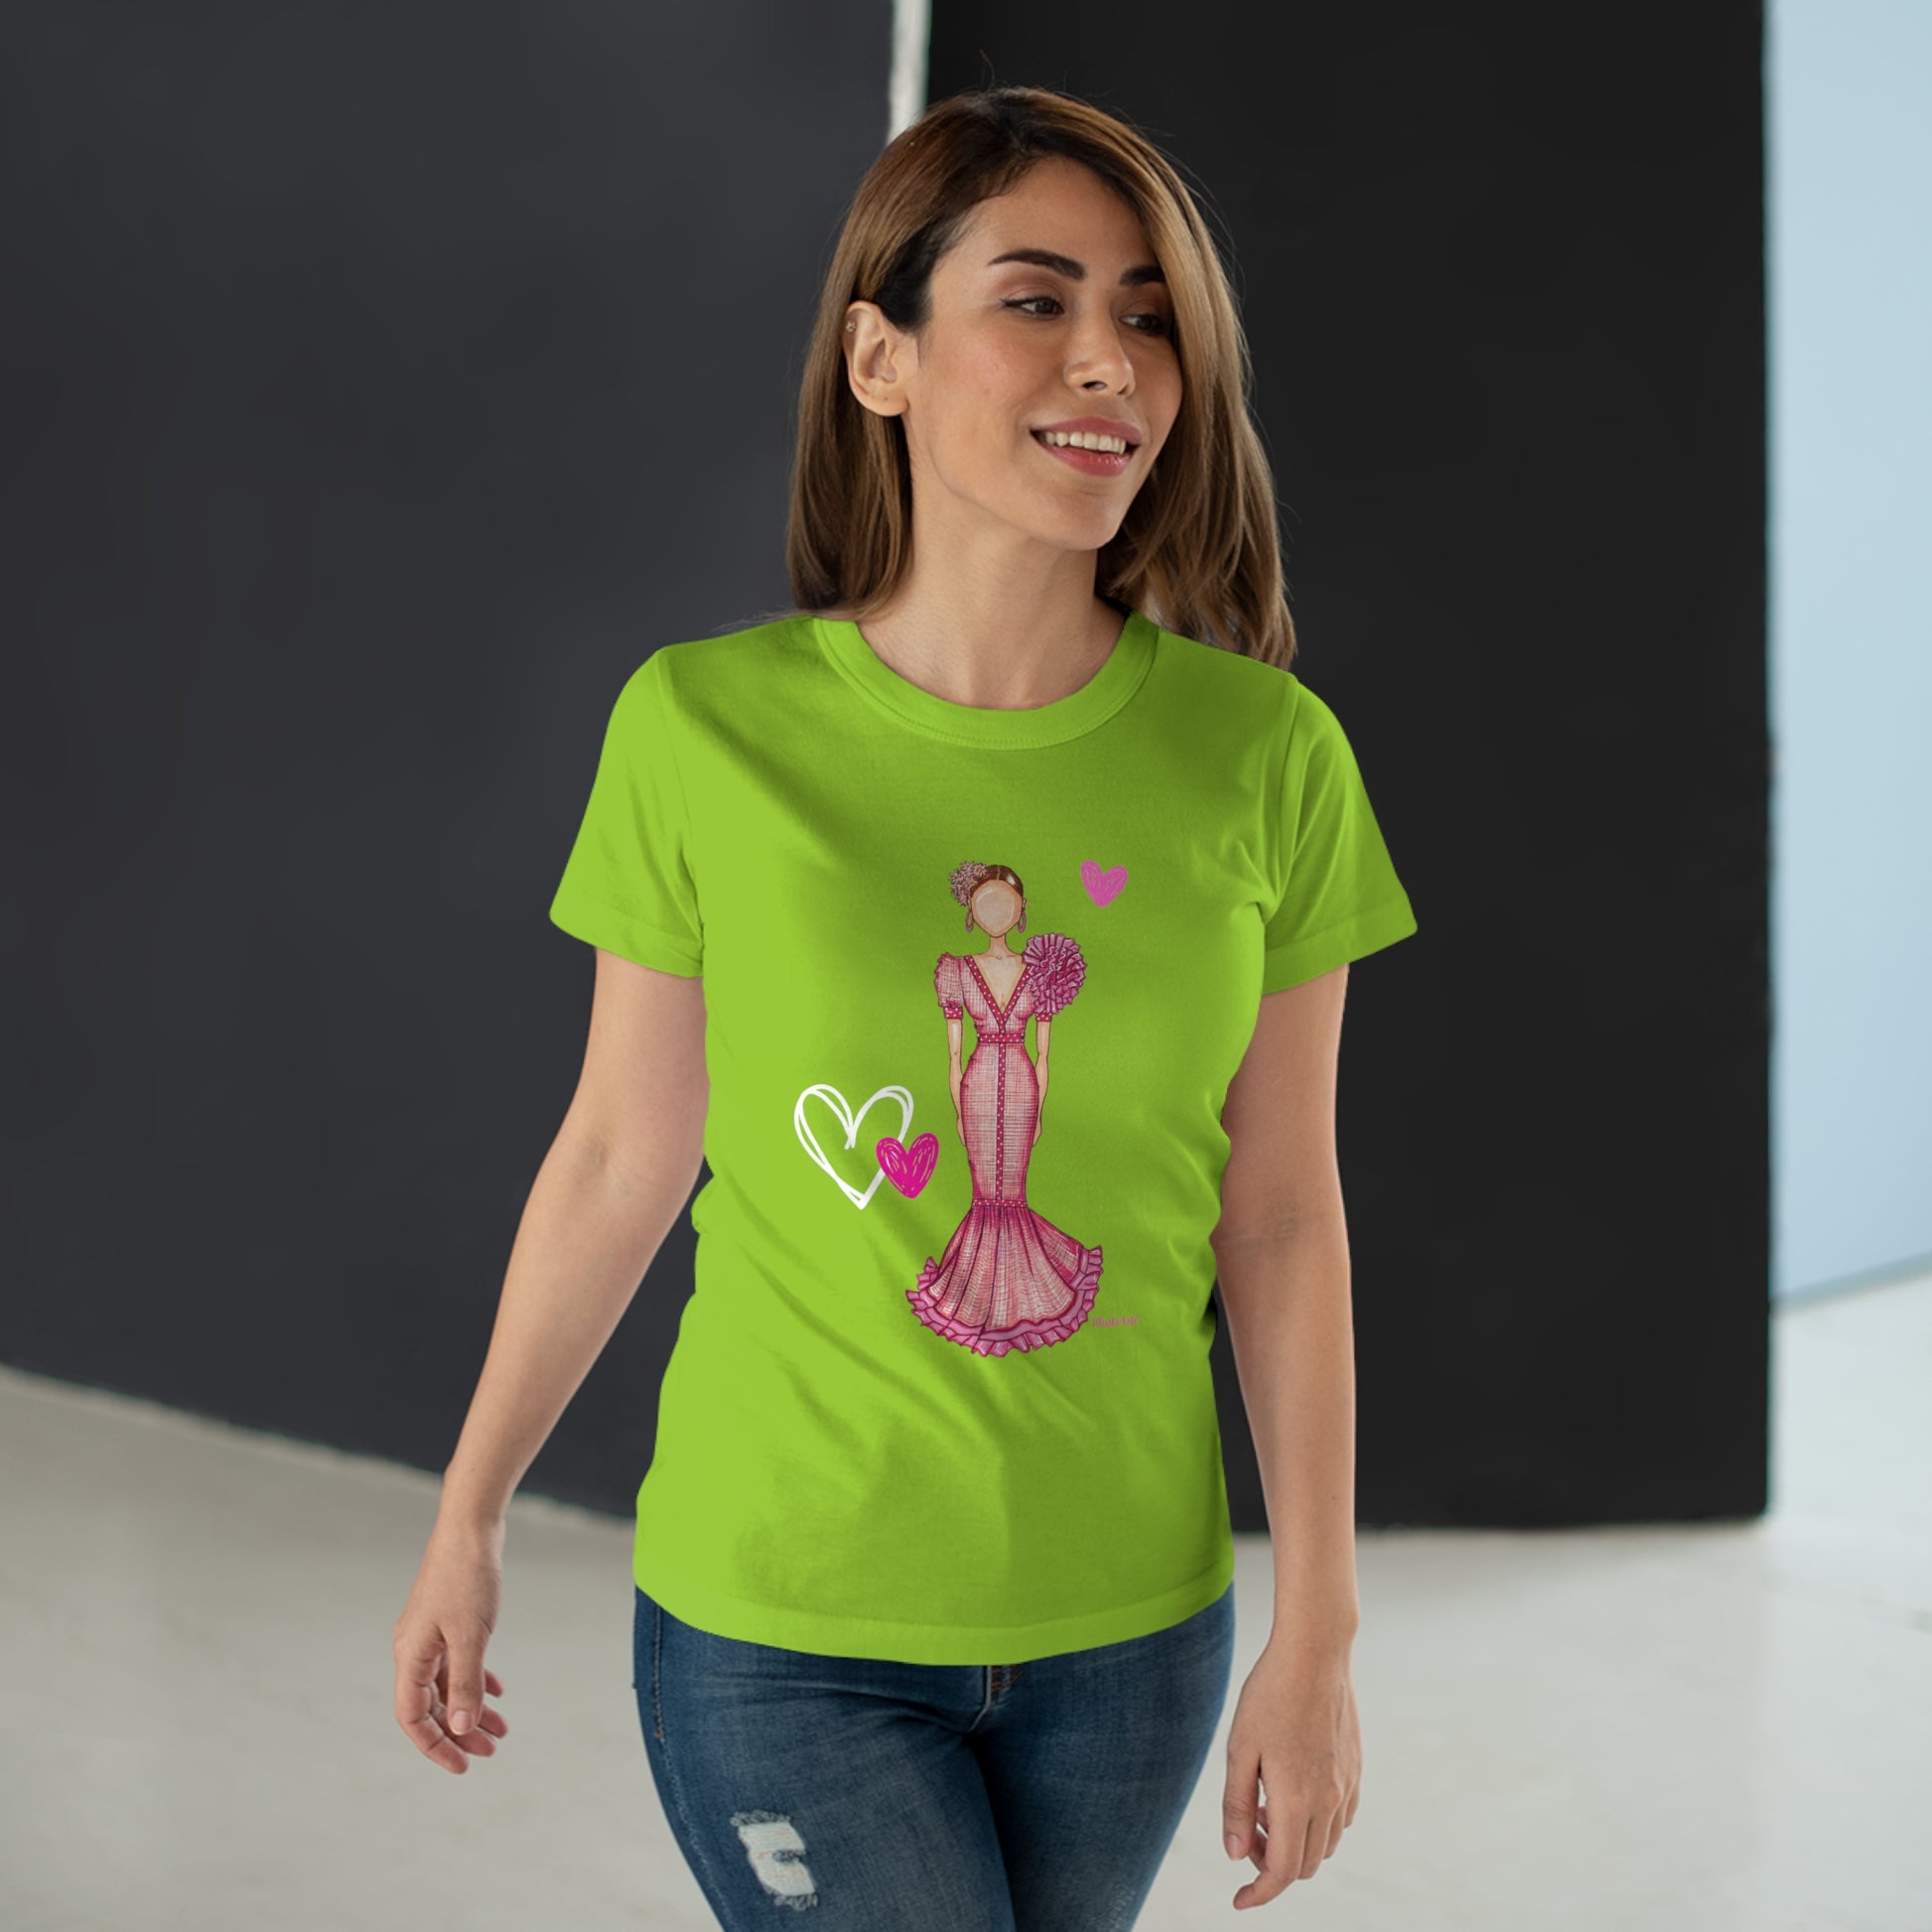 a woman wearing a green t - shirt with a pink dress on it